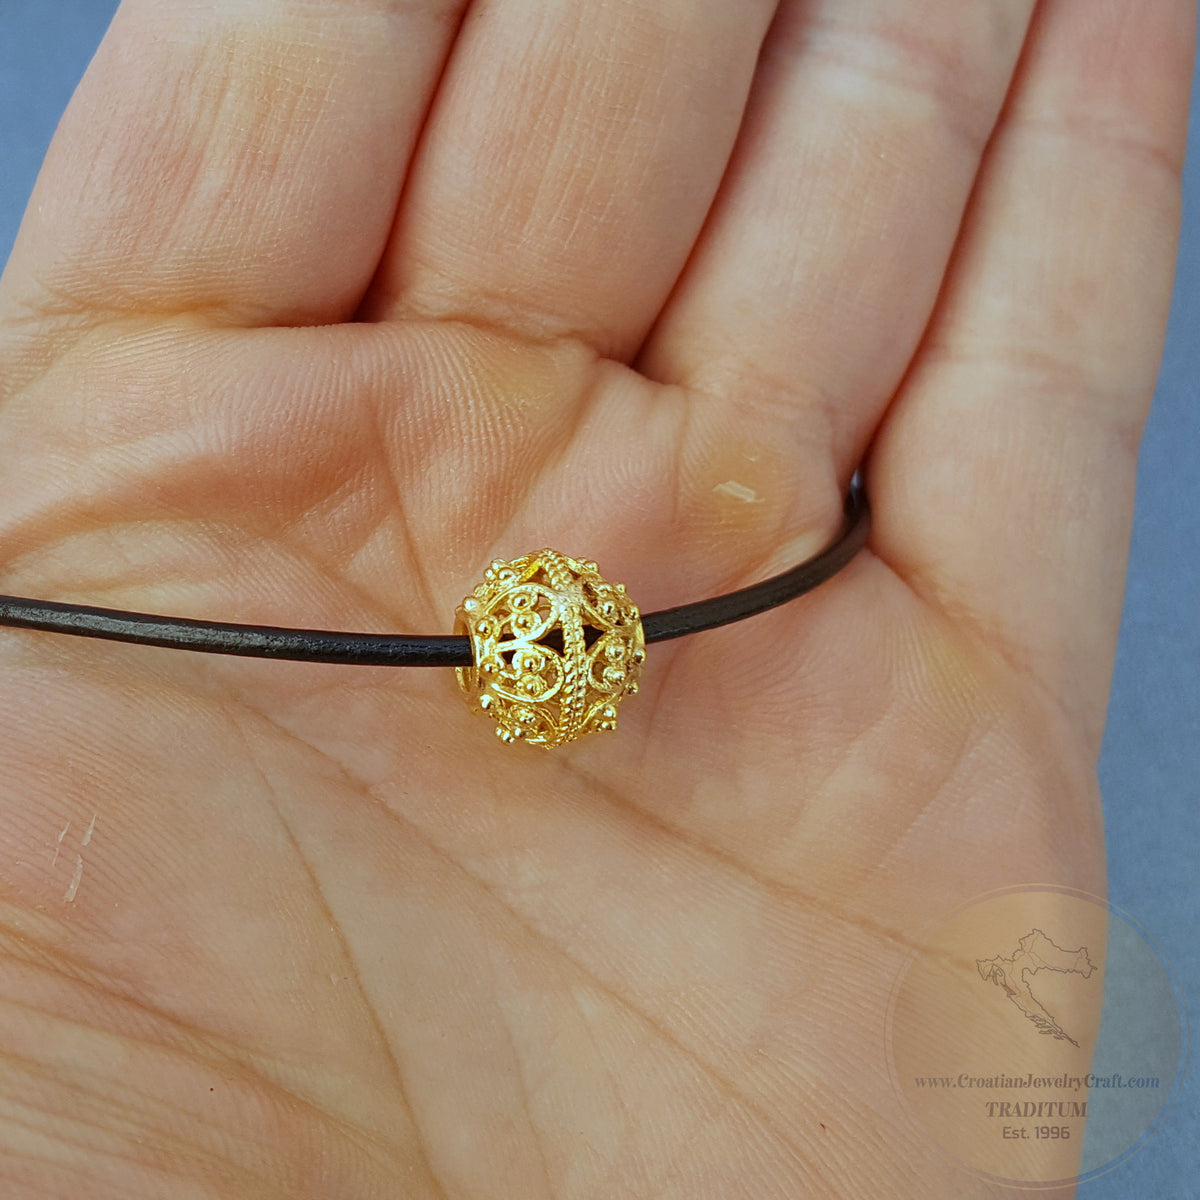 Dainty Sliding 14K Gold Pendant, Traditional Croatian Jewelry, Small Gold Pendant, Gold Filigree Slide Ball Pendant, Dainty Chain Necklace Only